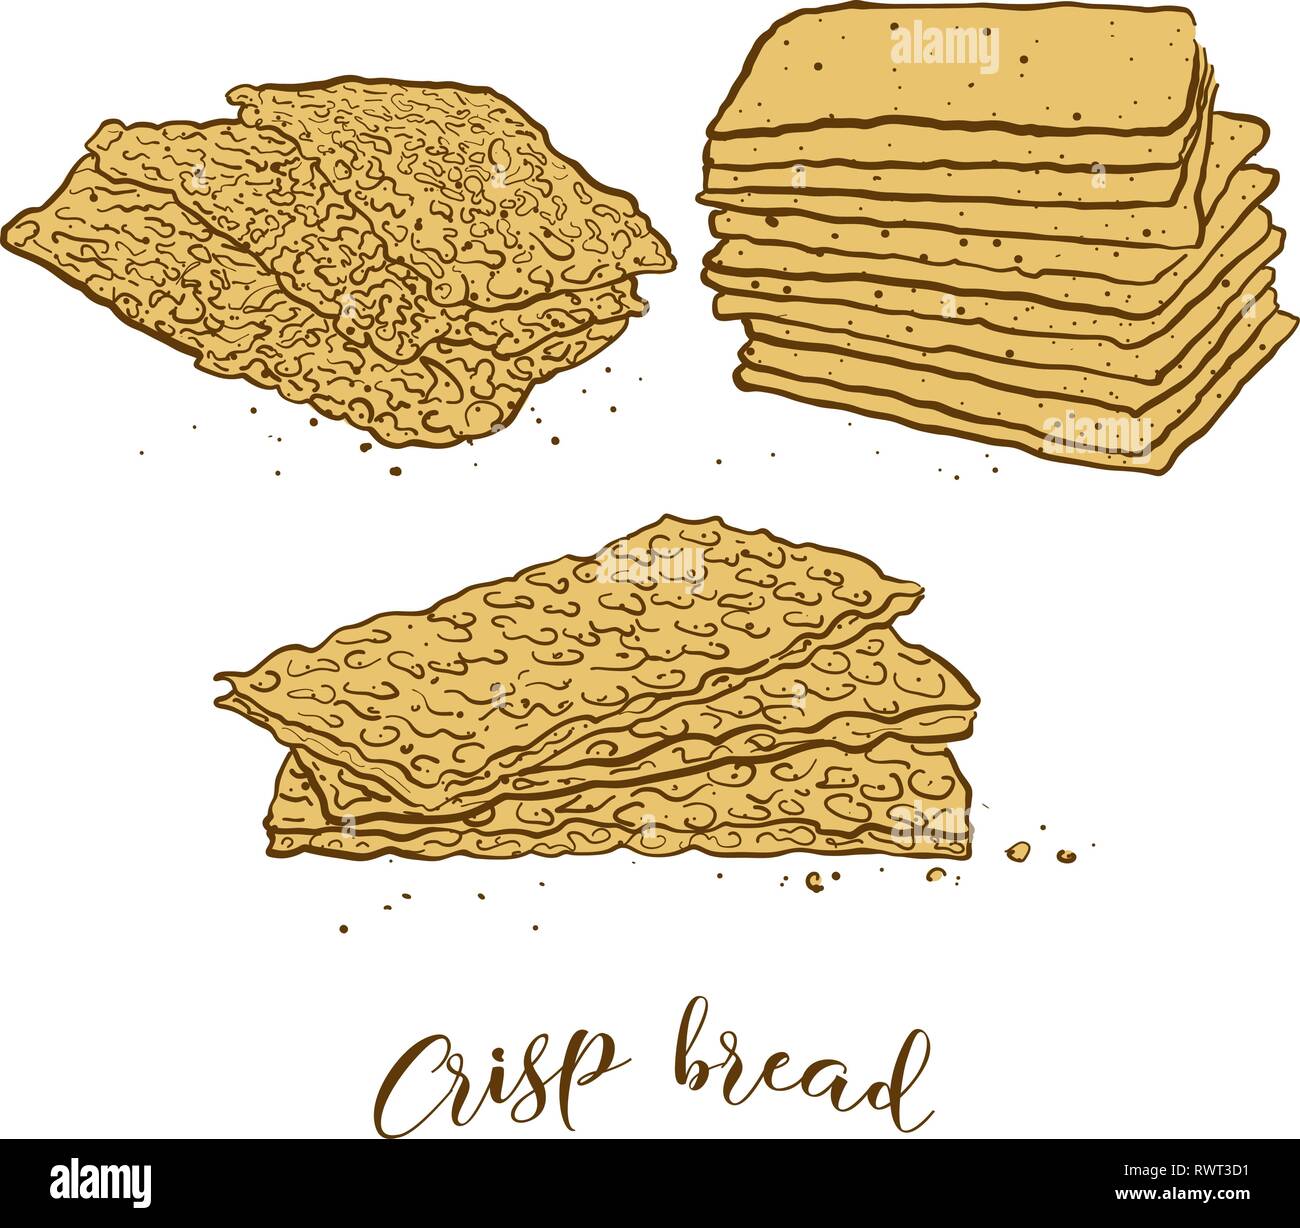 Colored sketches of Crisp bread bread. Vector drawing of Crispy bread food, usually known in Scandinavia. Colored Bread illustration series. Stock Vector